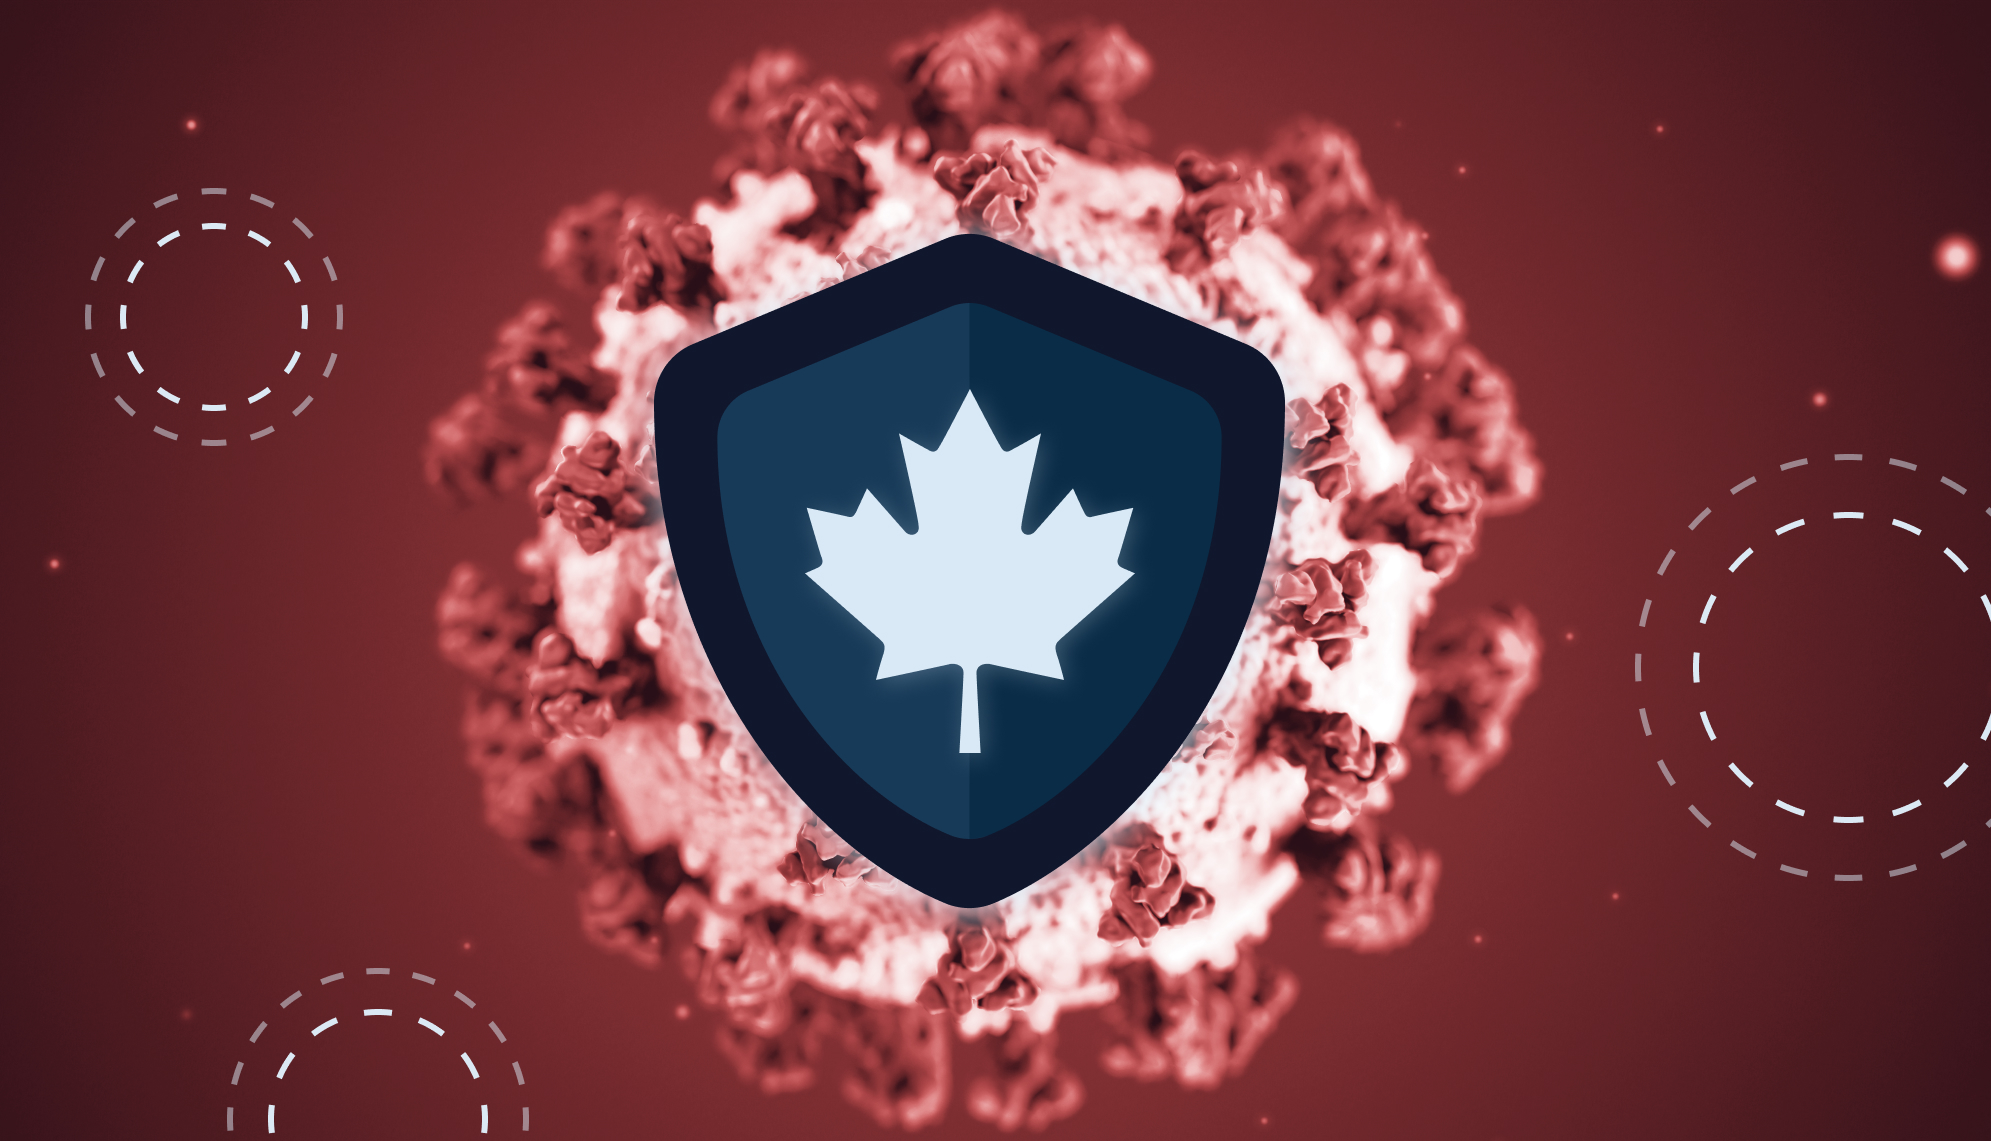 Maple leaf on a shield in front of the coronavirus